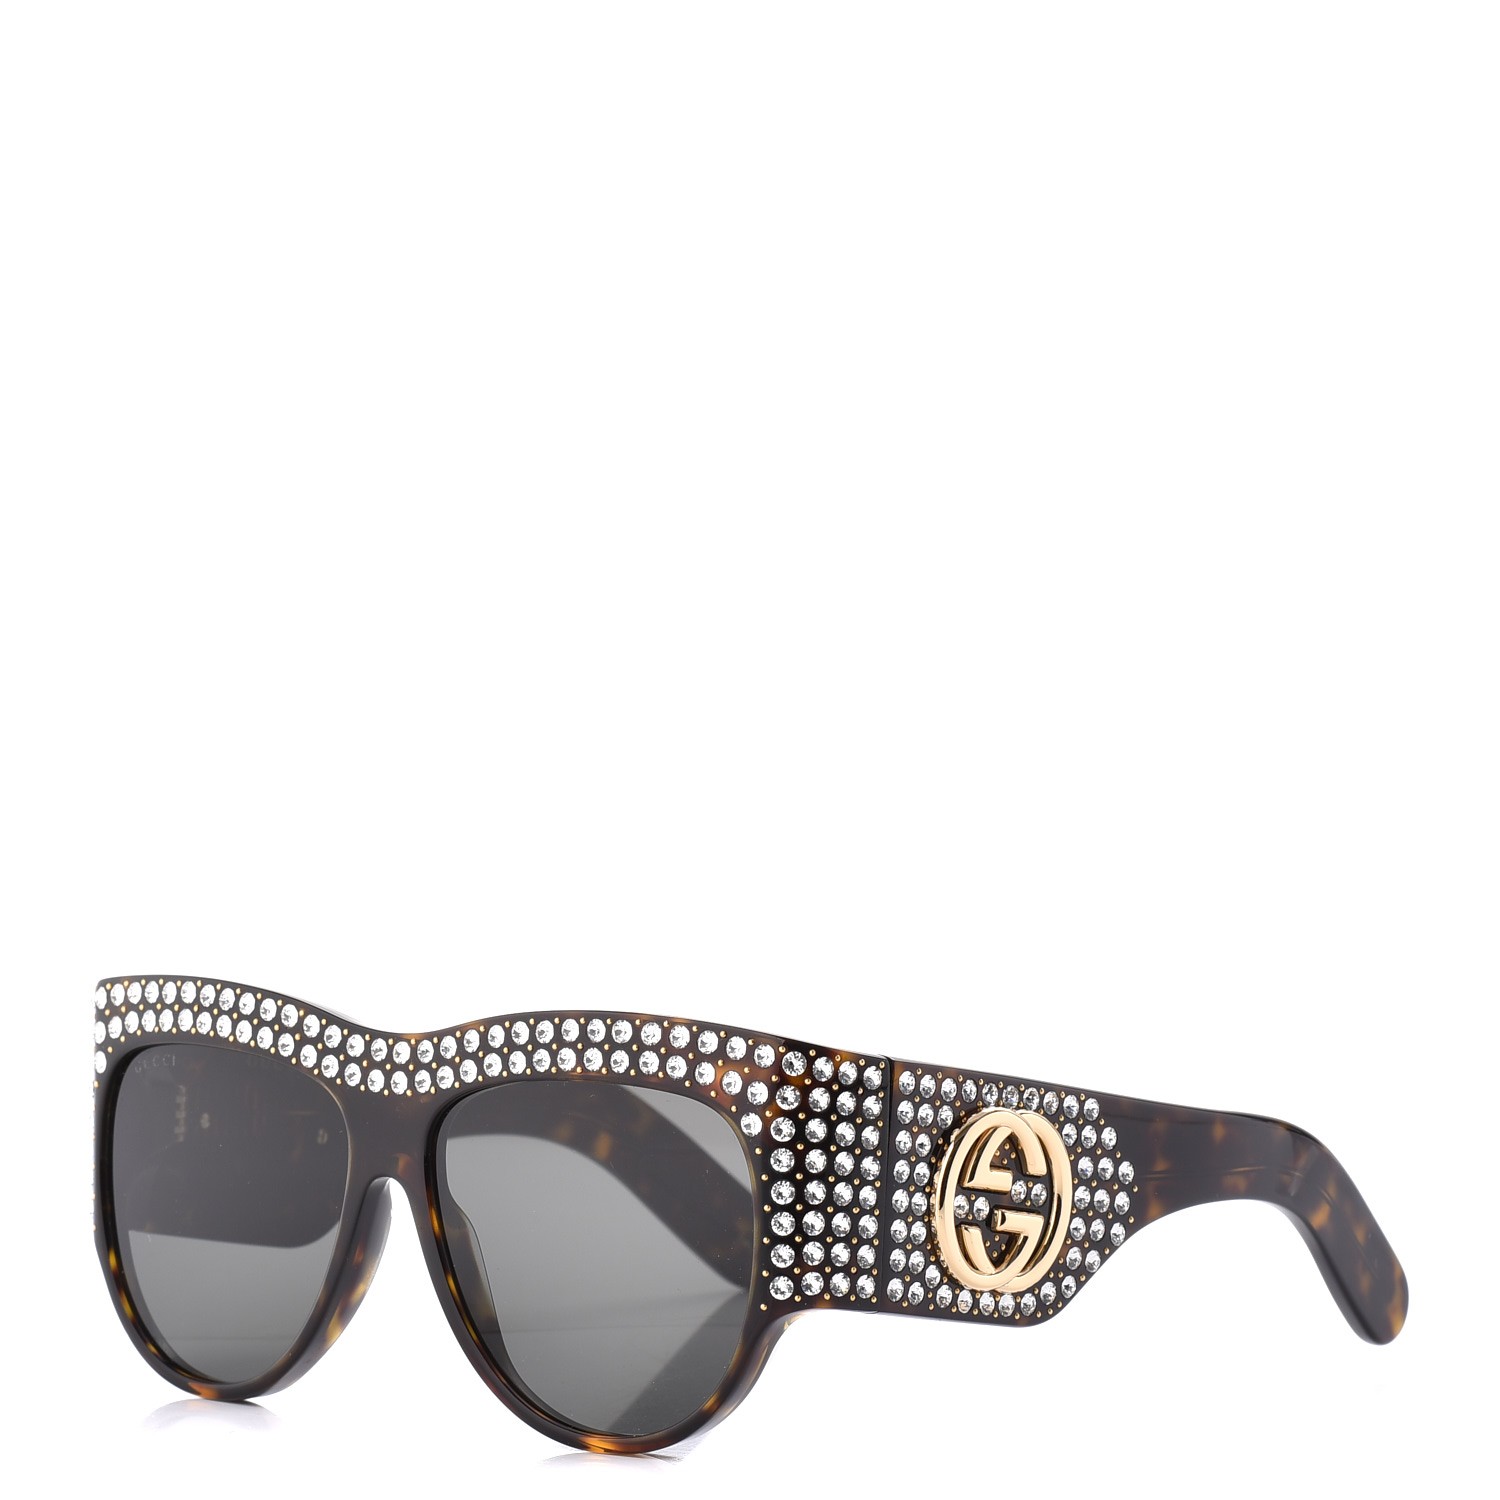 Gucci Acetate Crystal Oversize Hollywood Forever Sunglasses Gg0144s Tortoiseshell 248166